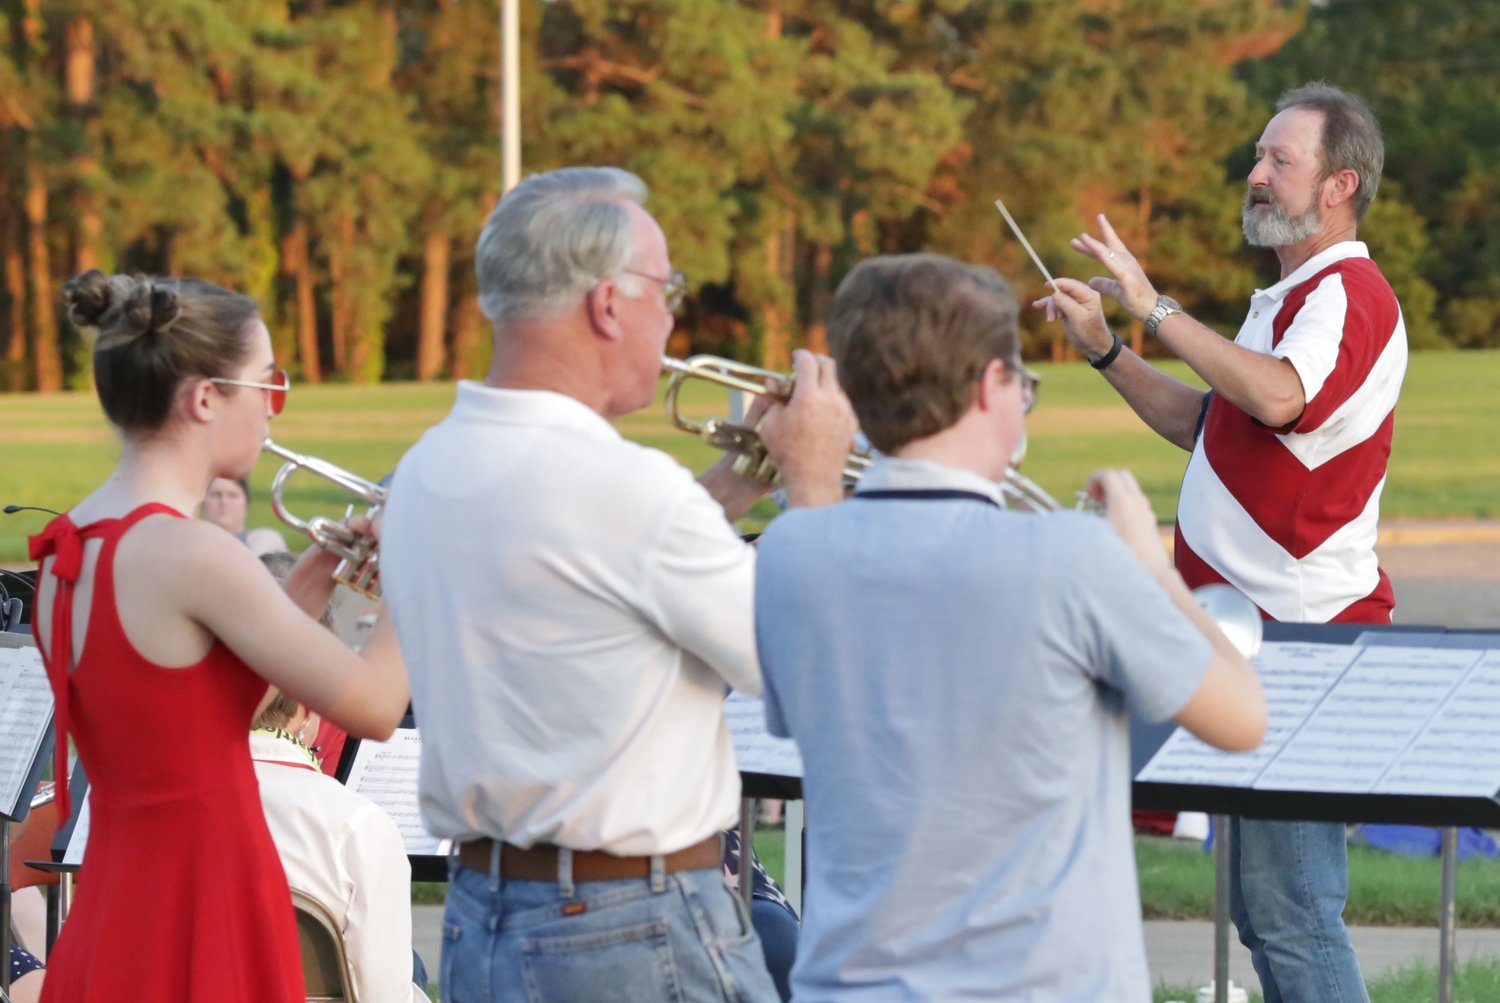 Lake Country Symphonic Band conductor Mike Holbrook and the trumpet section lead the band at Sunday’s Independence Day celebration at the Mineola Civic Center.